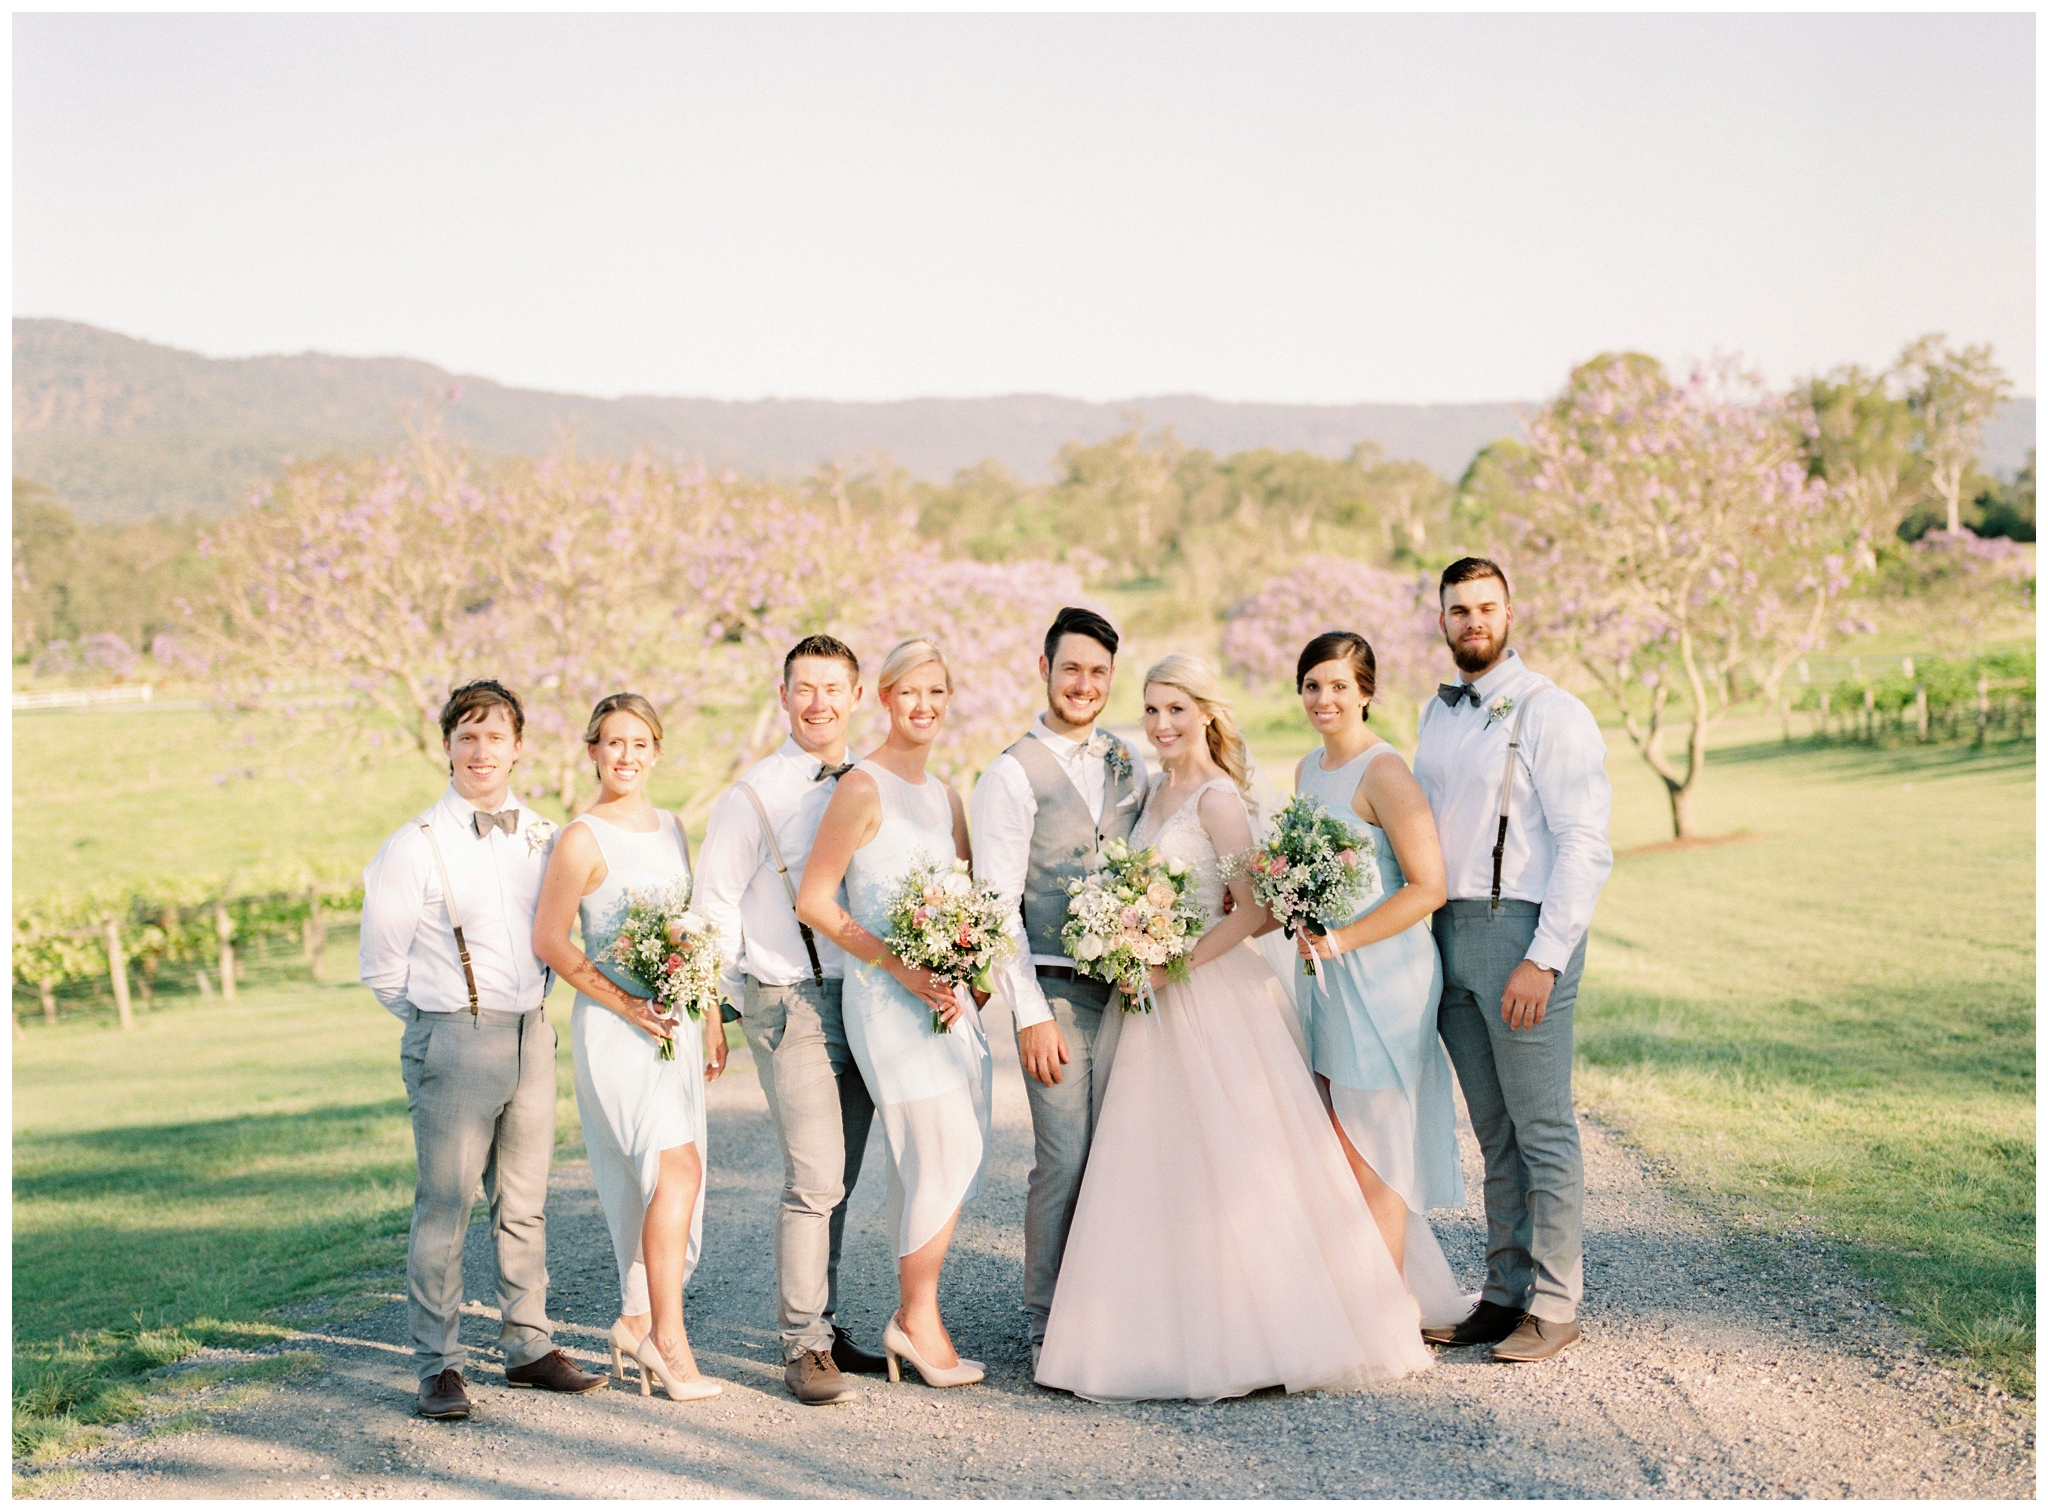 Tegan and Alex Wedding at Albert River Wines by Casey Jane Photography 59